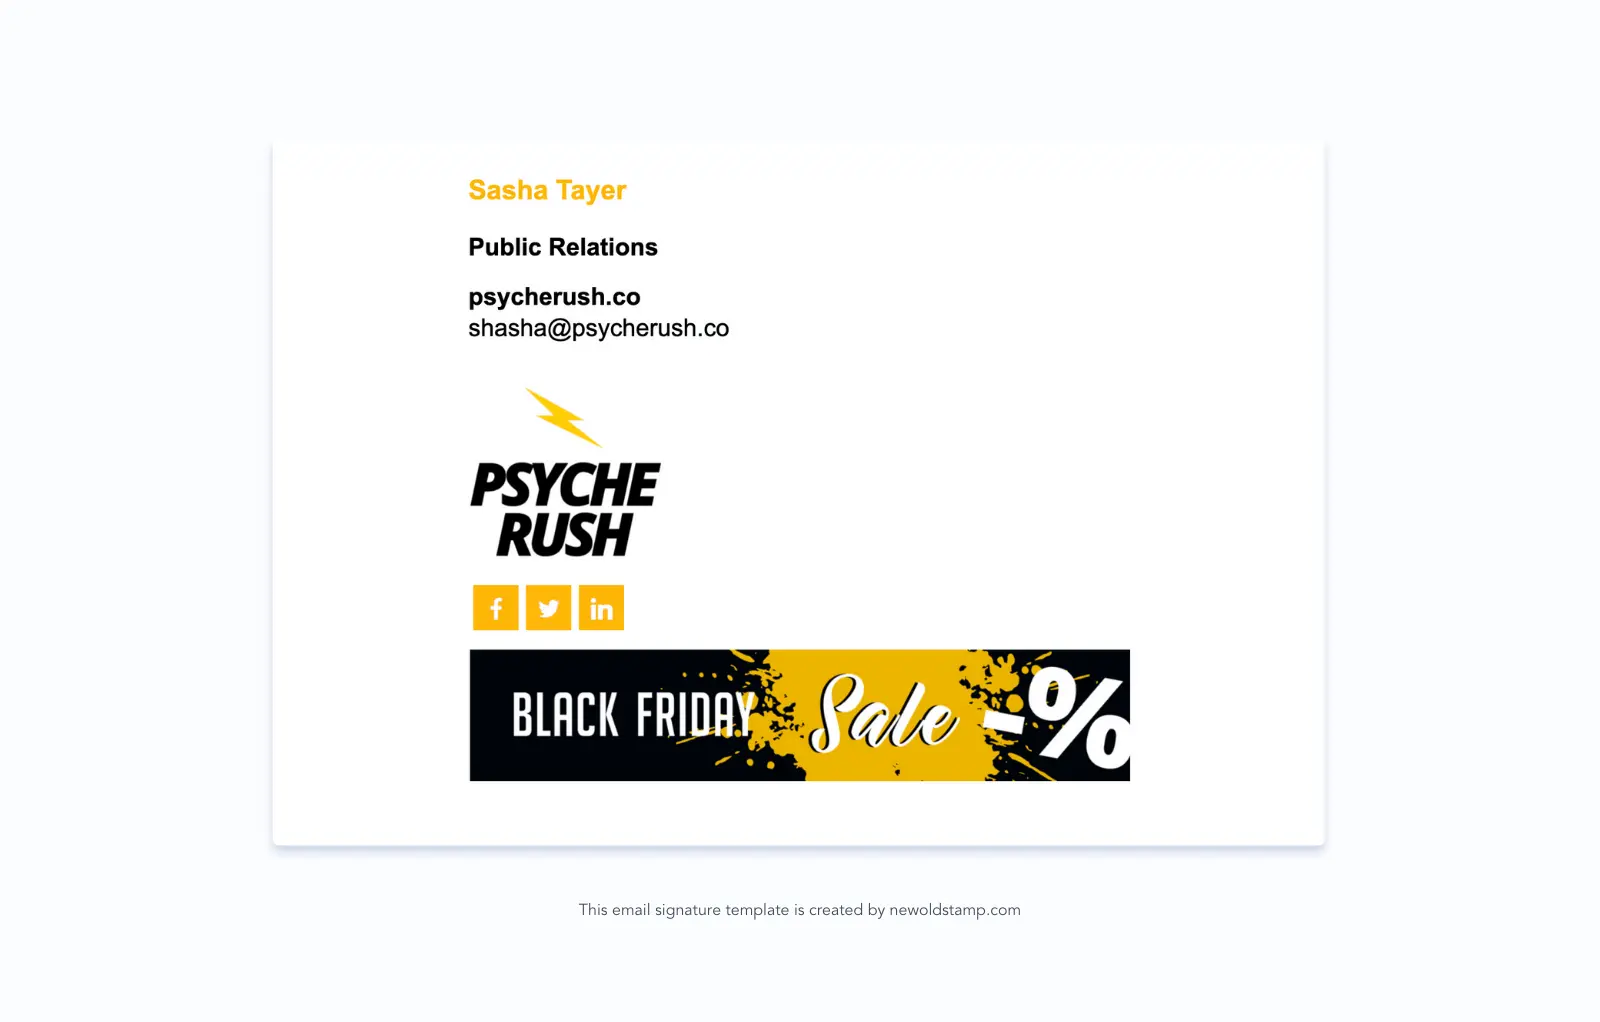 Black Friday and Cyber Monday email signatures